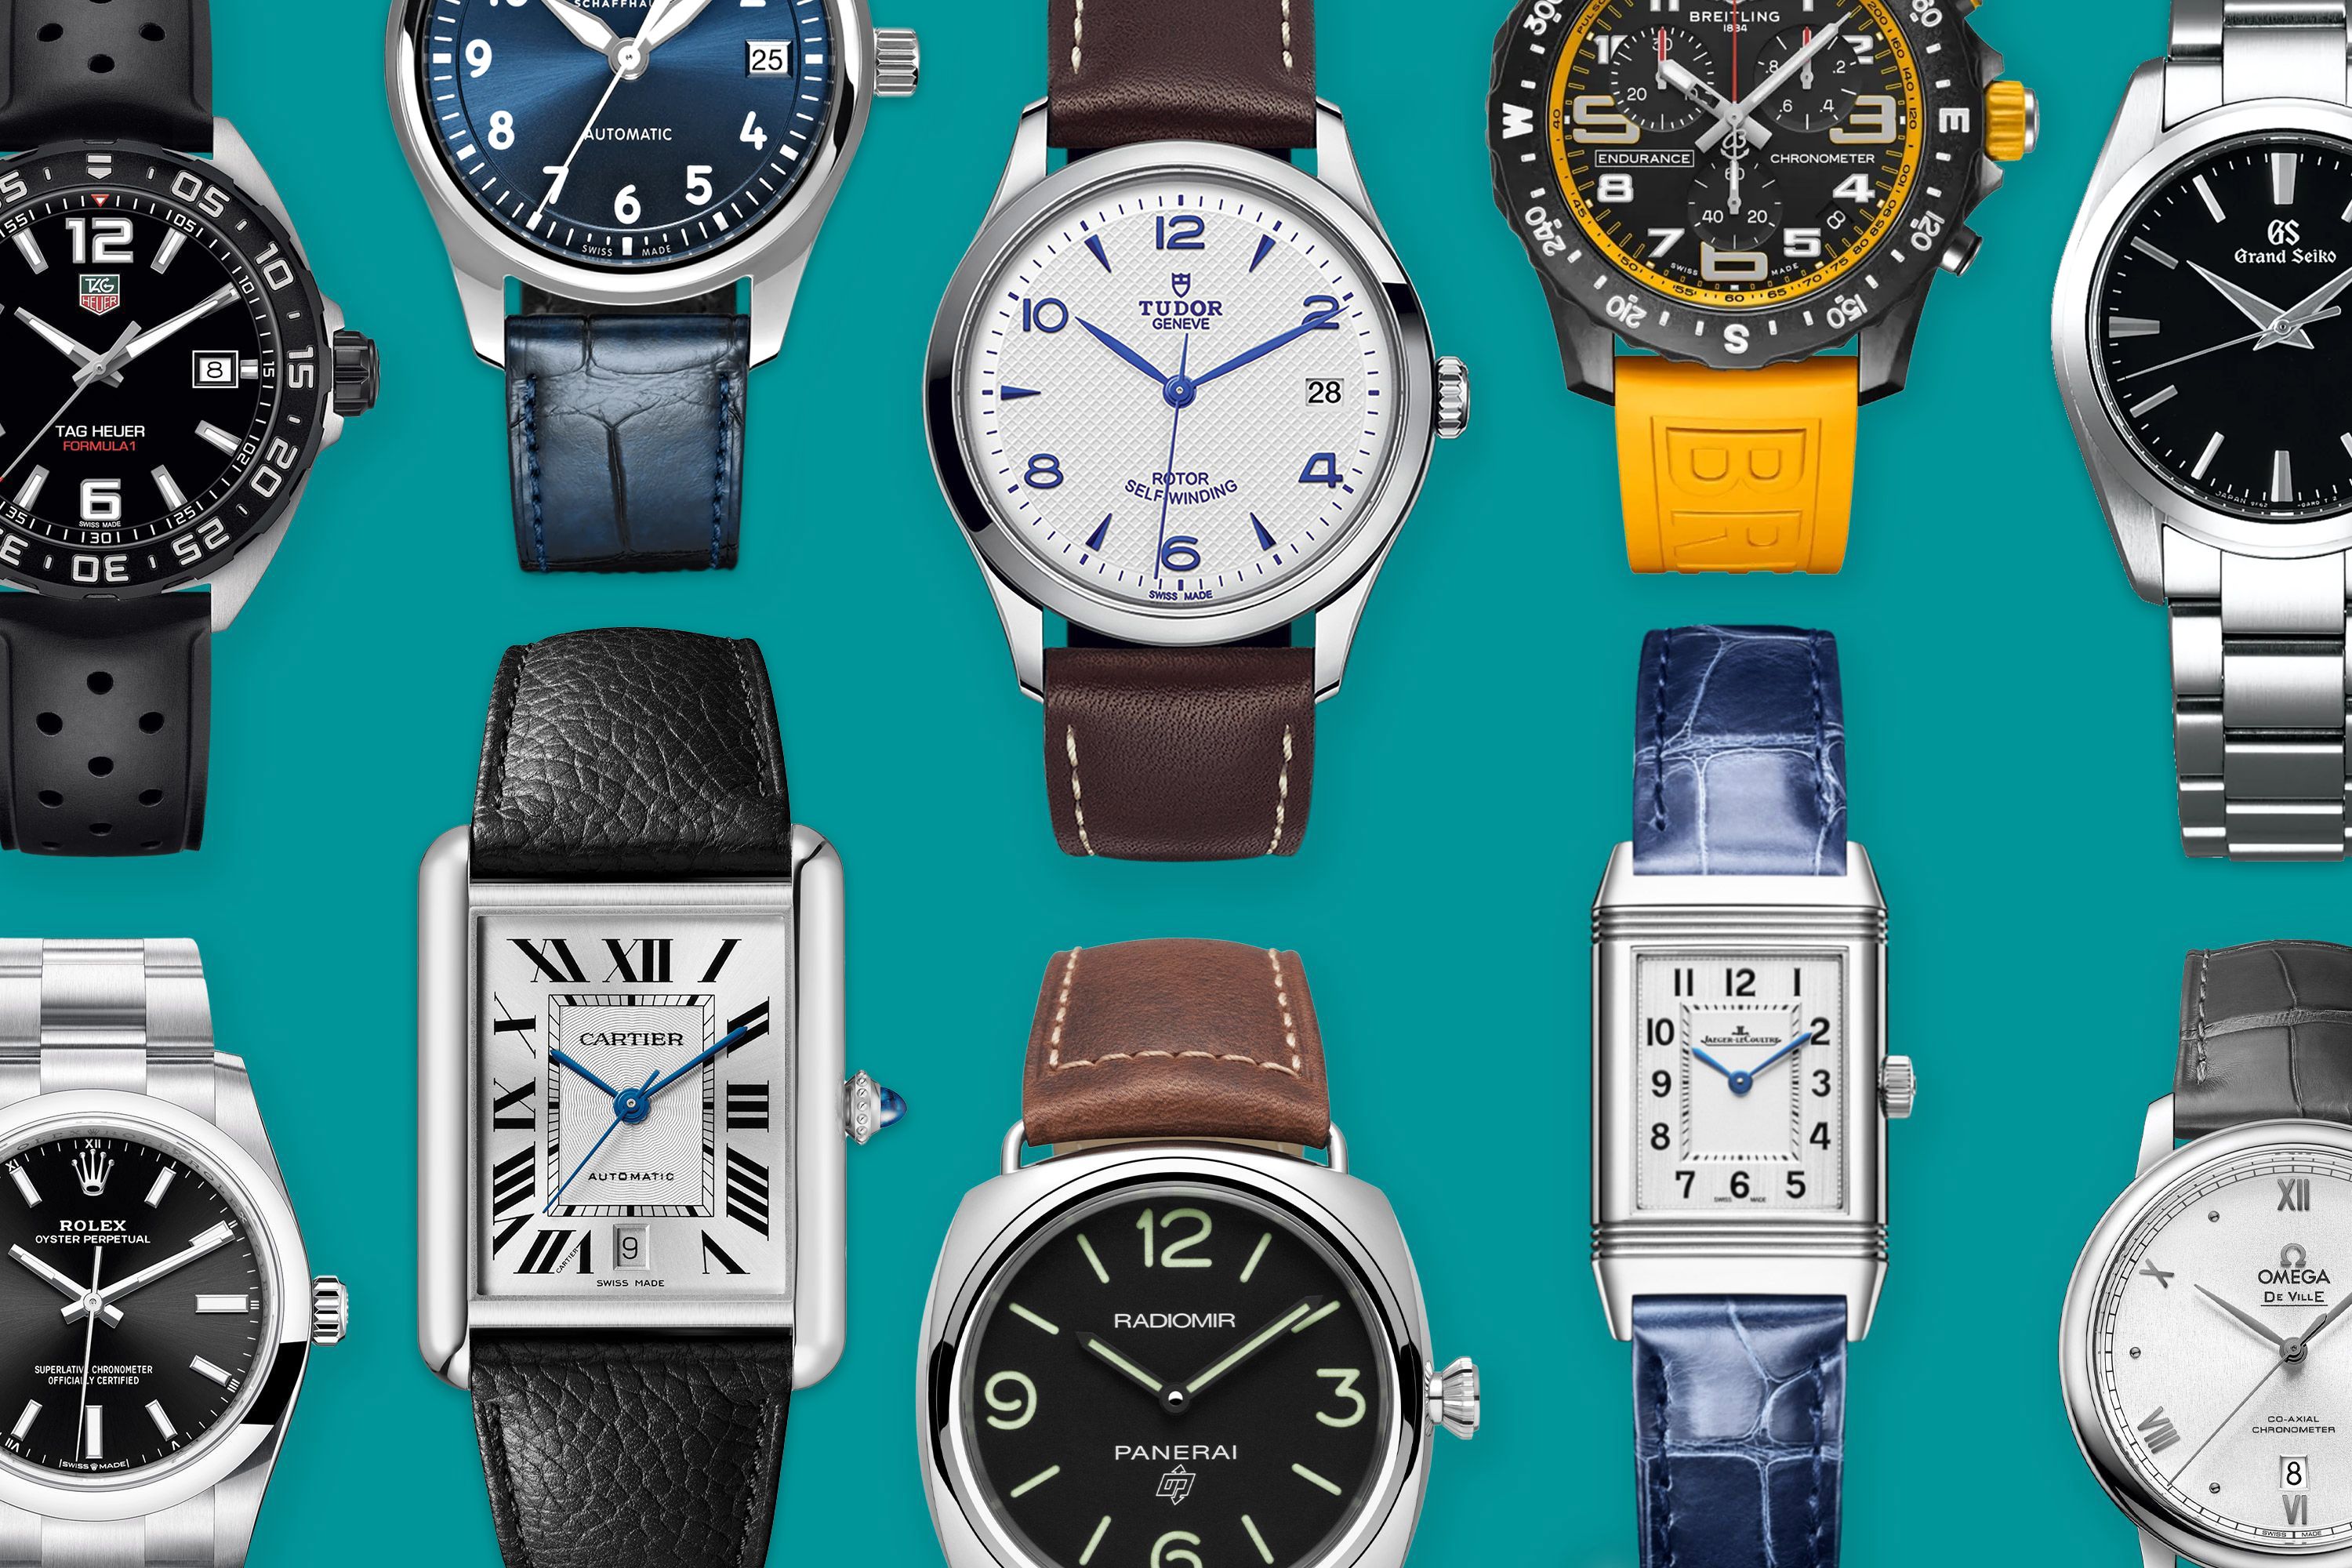 indgang nå Lejlighedsvis These Are the Entry-Level Watches From 10 Great Luxury Watch Brands